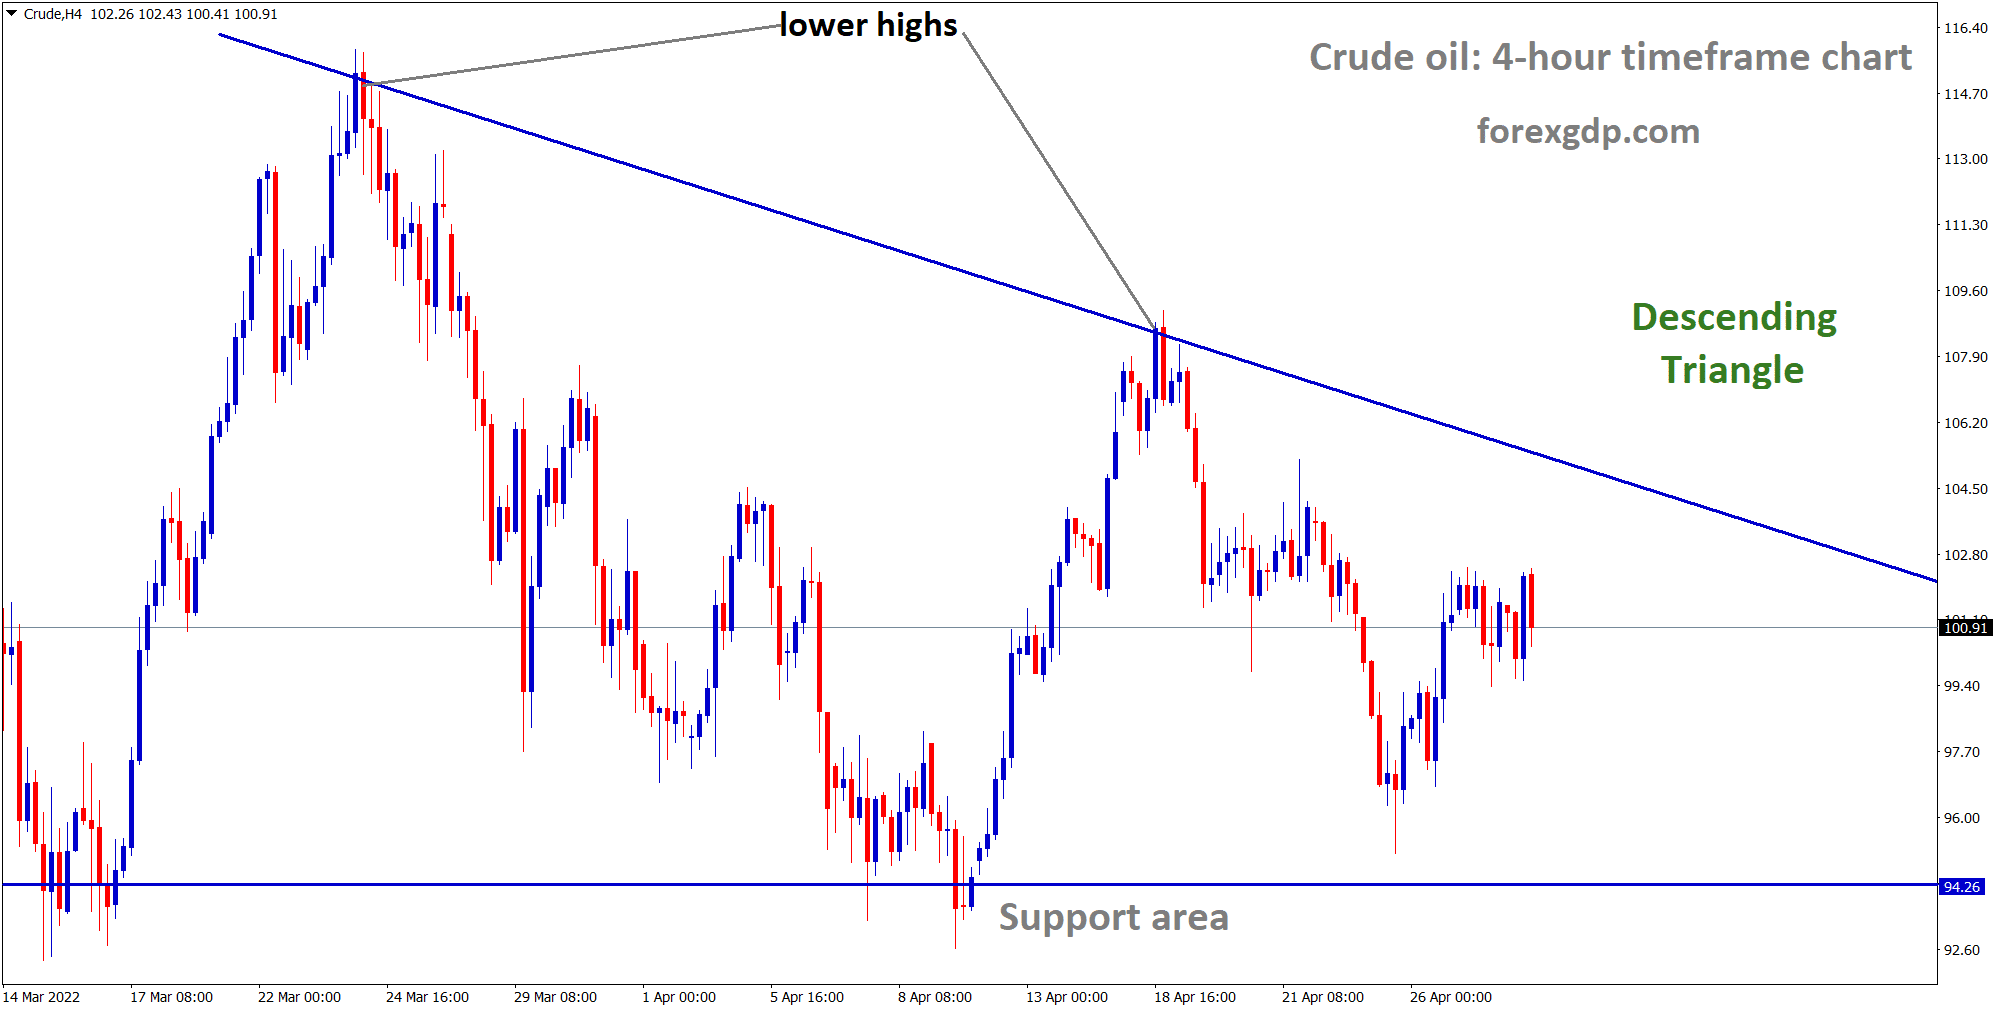 Crude oil moving in descending triangle pattern and reached lower highs in 4 hour Timeframe chart 1